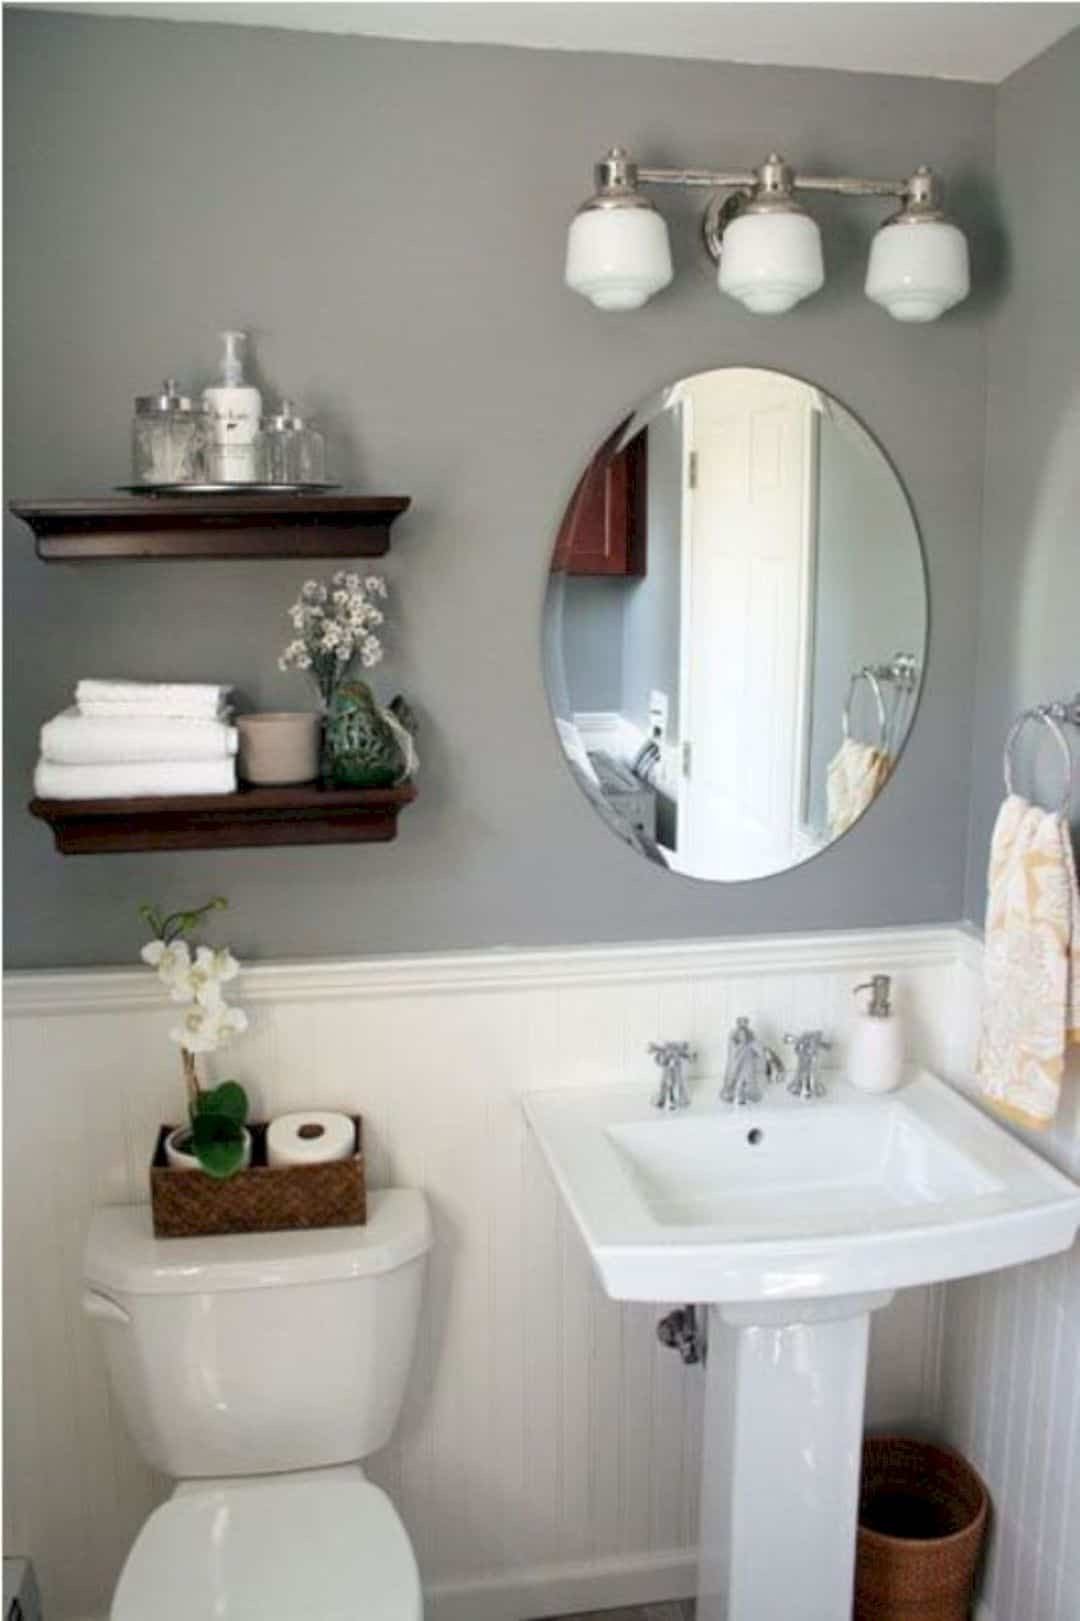 Bathroom Sink Decorating Ideas
 17 Awesome Small Bathroom Decorating Ideas